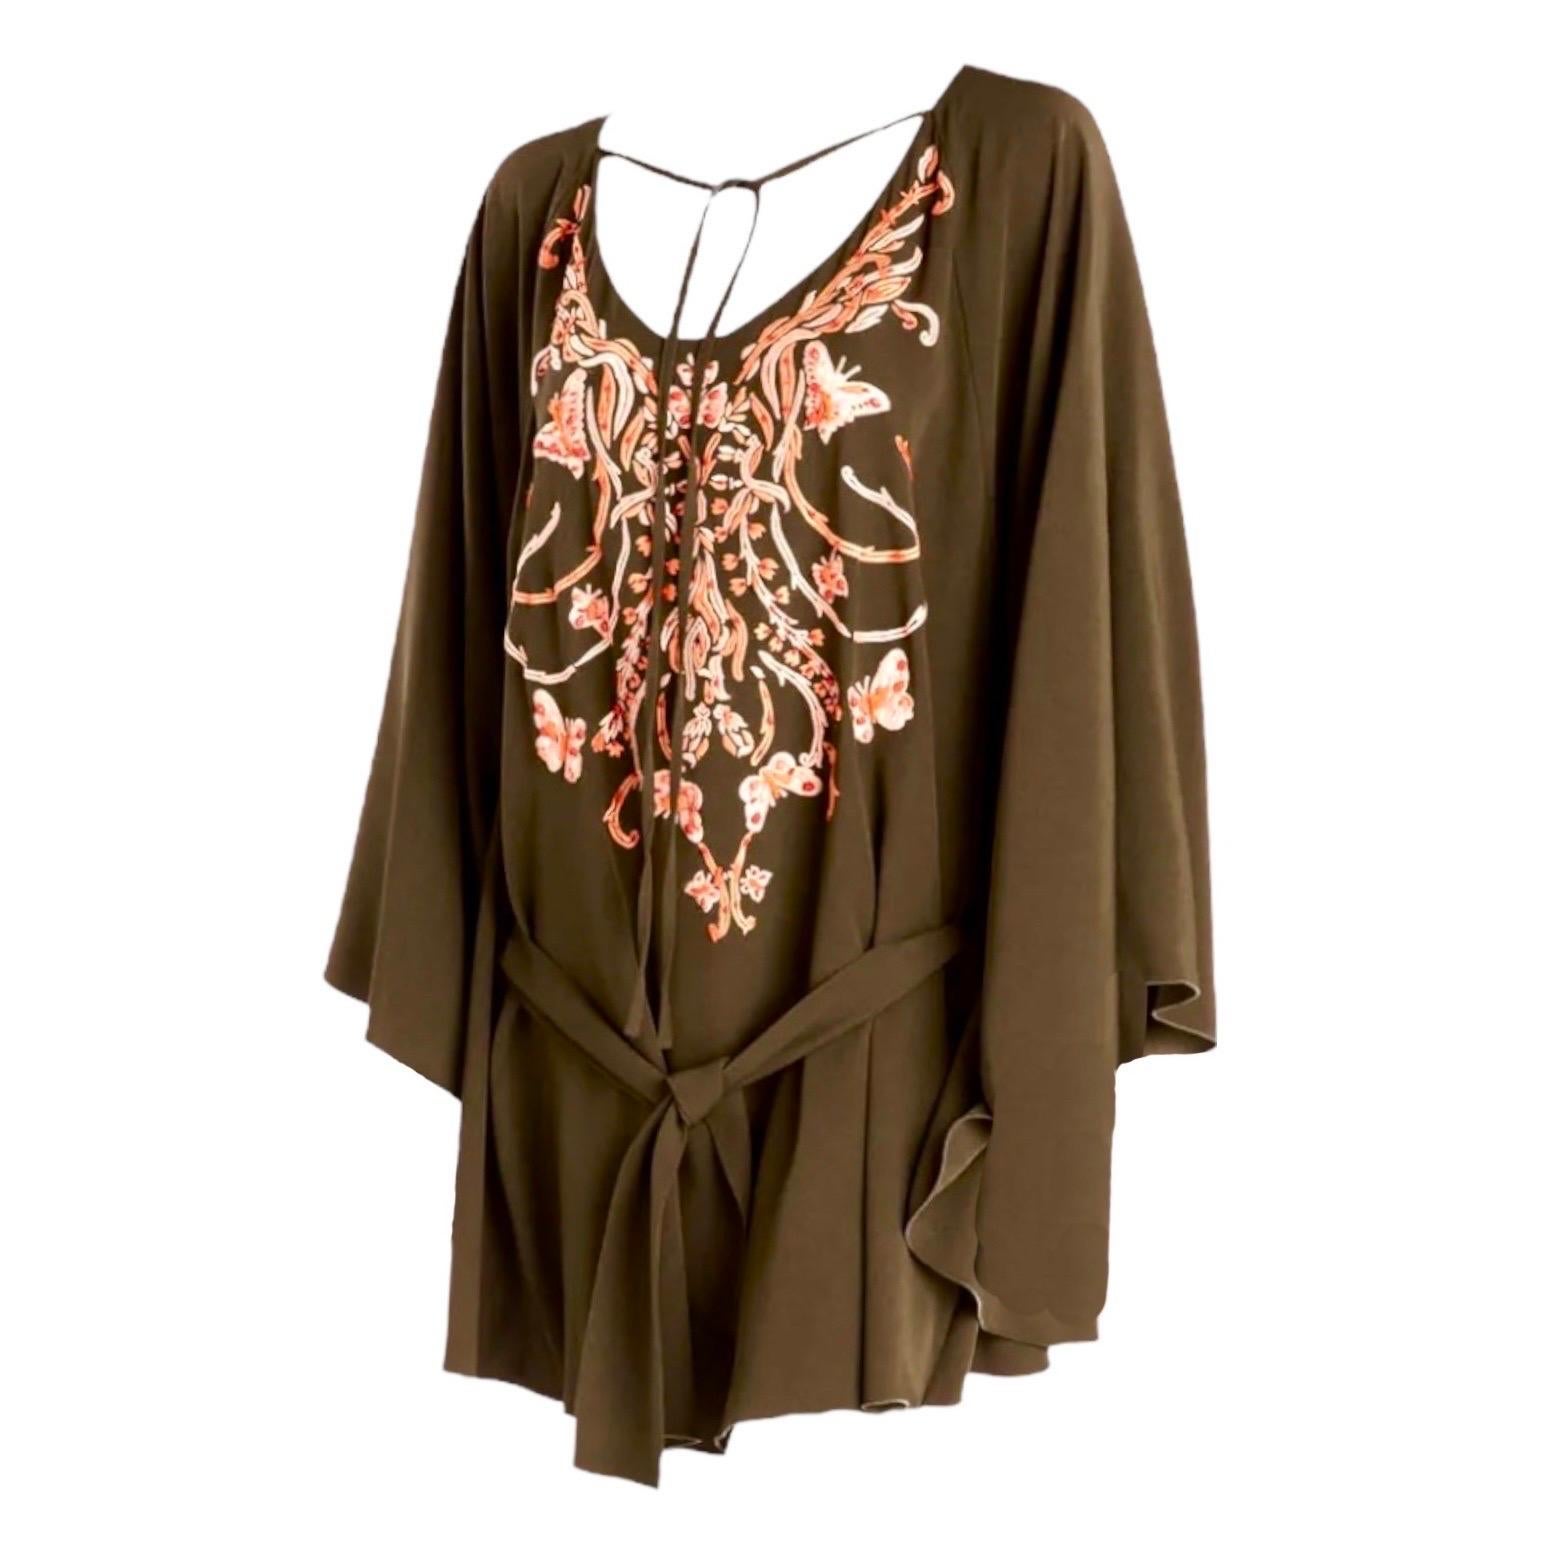 NEW Emilio Pucci by Peter Dundas Belted Embroidered Beaded Kaftan Dress 44